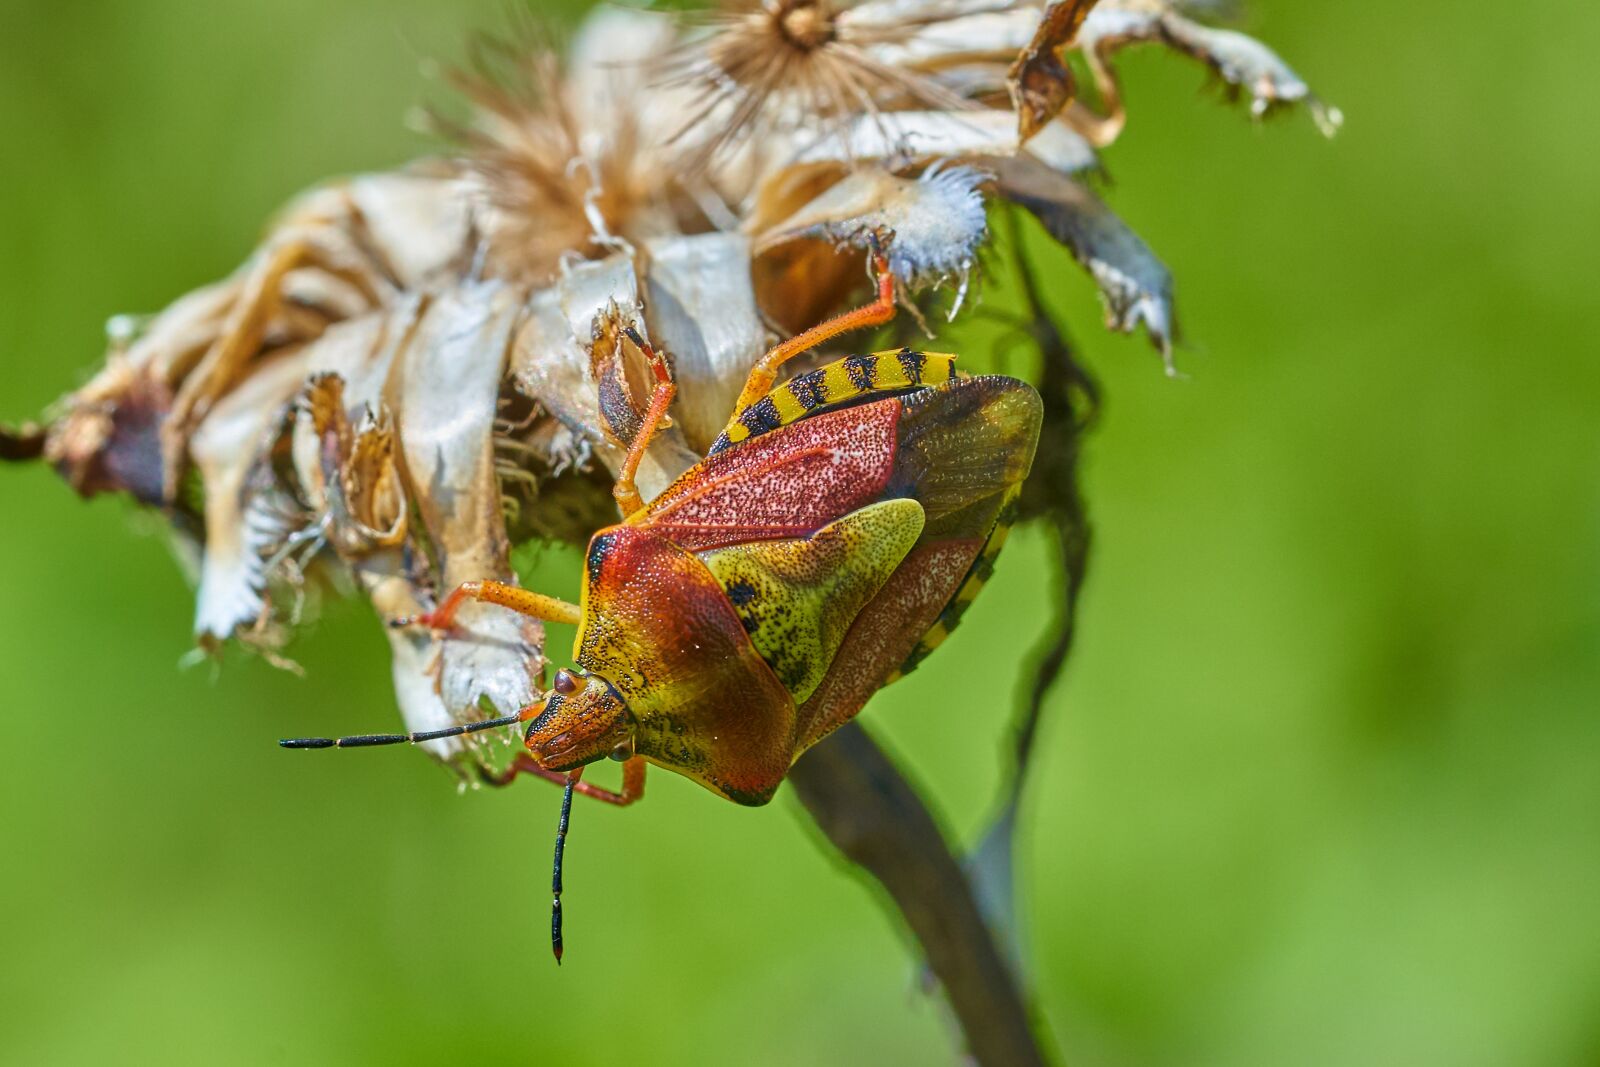 Sony a7 III sample photo. Beetle, flower, insect photography